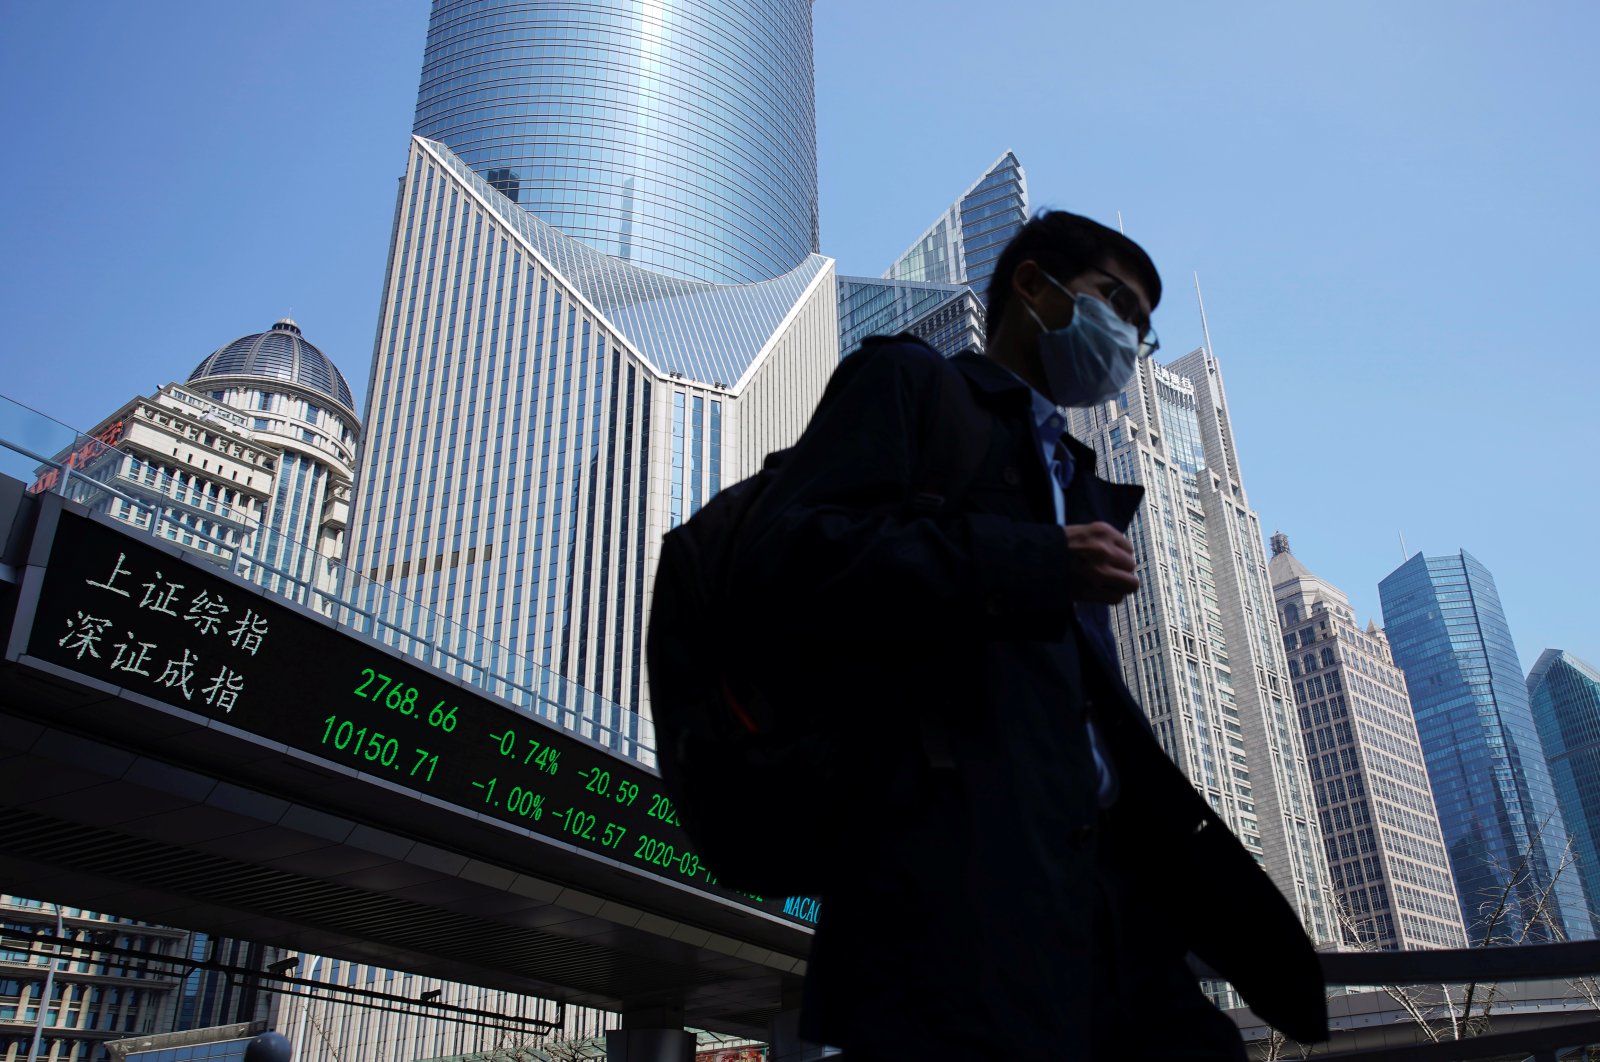 A pedestrian wearing a face mask walks near an overpass with an electronic board showing stock information, following an outbreak of a novel coronavirus in Shanghai, China, March 17, 2020. (Reuters Photo)